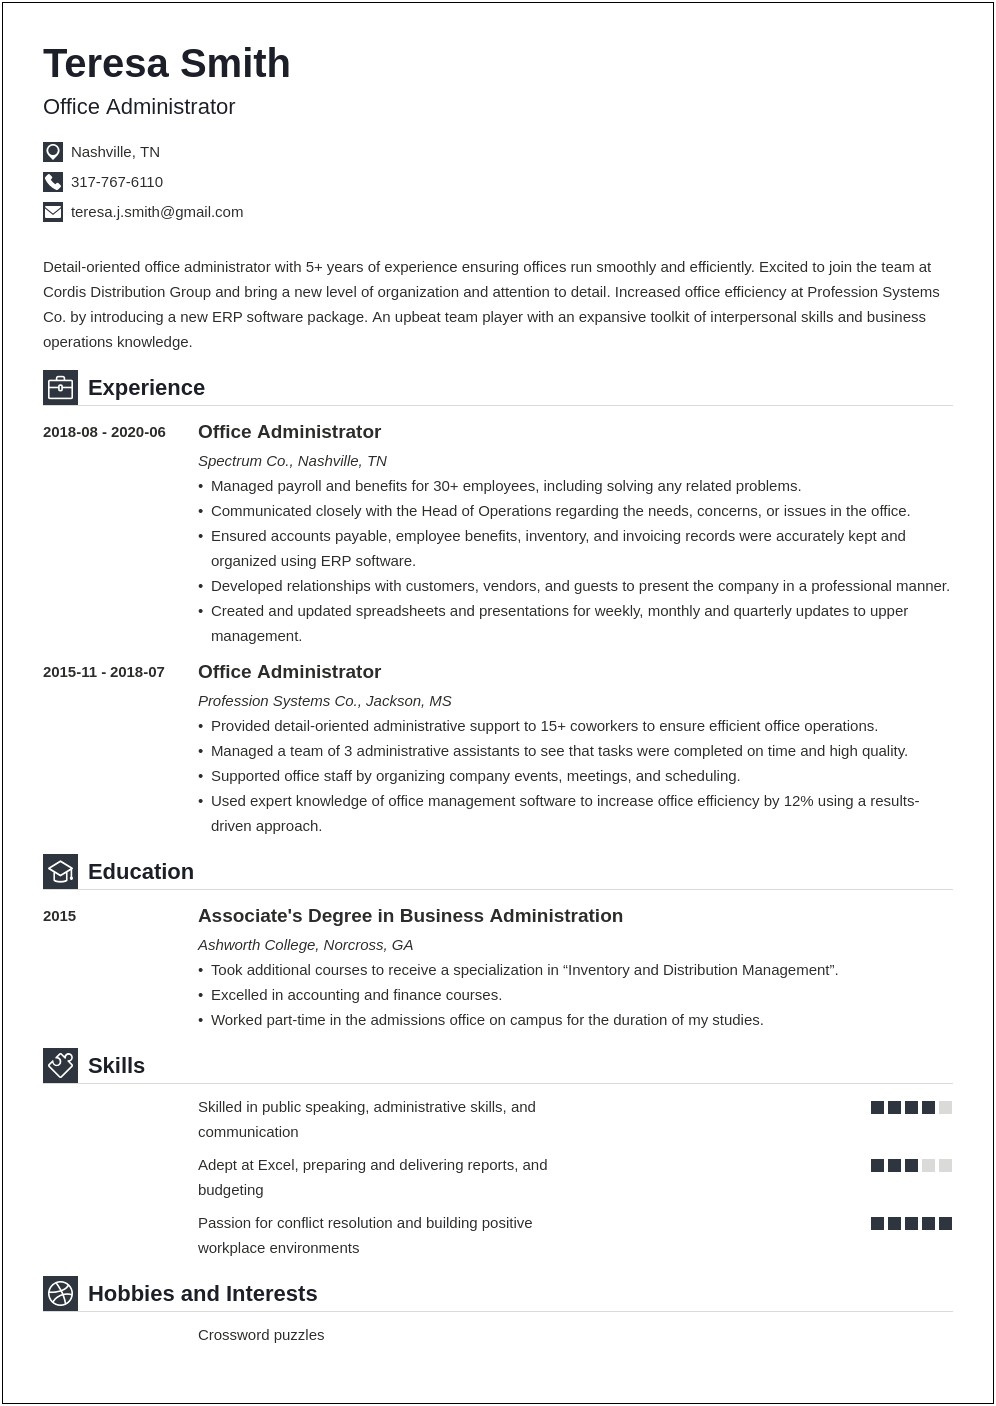 Resume Title Samples For Office Jobs